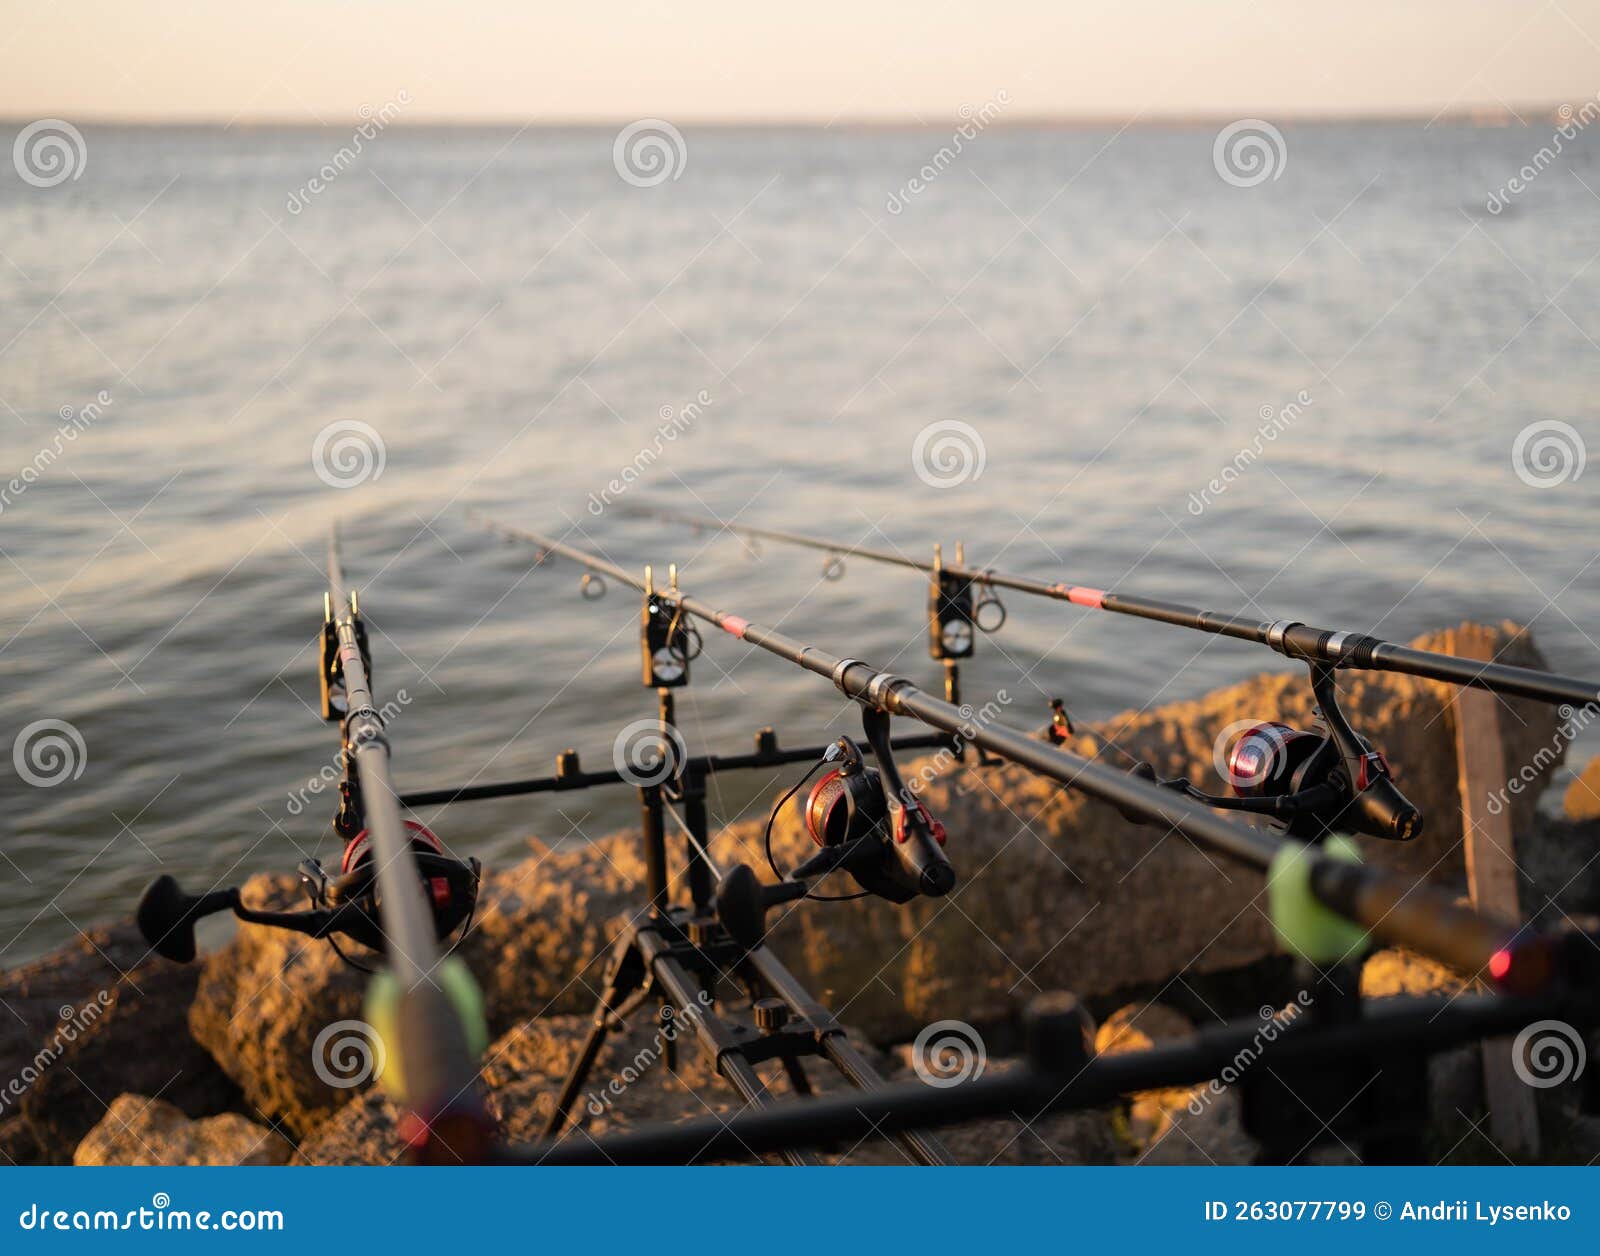 Carp Rod on the Stand on Fishing. Stock Image - Image of catch